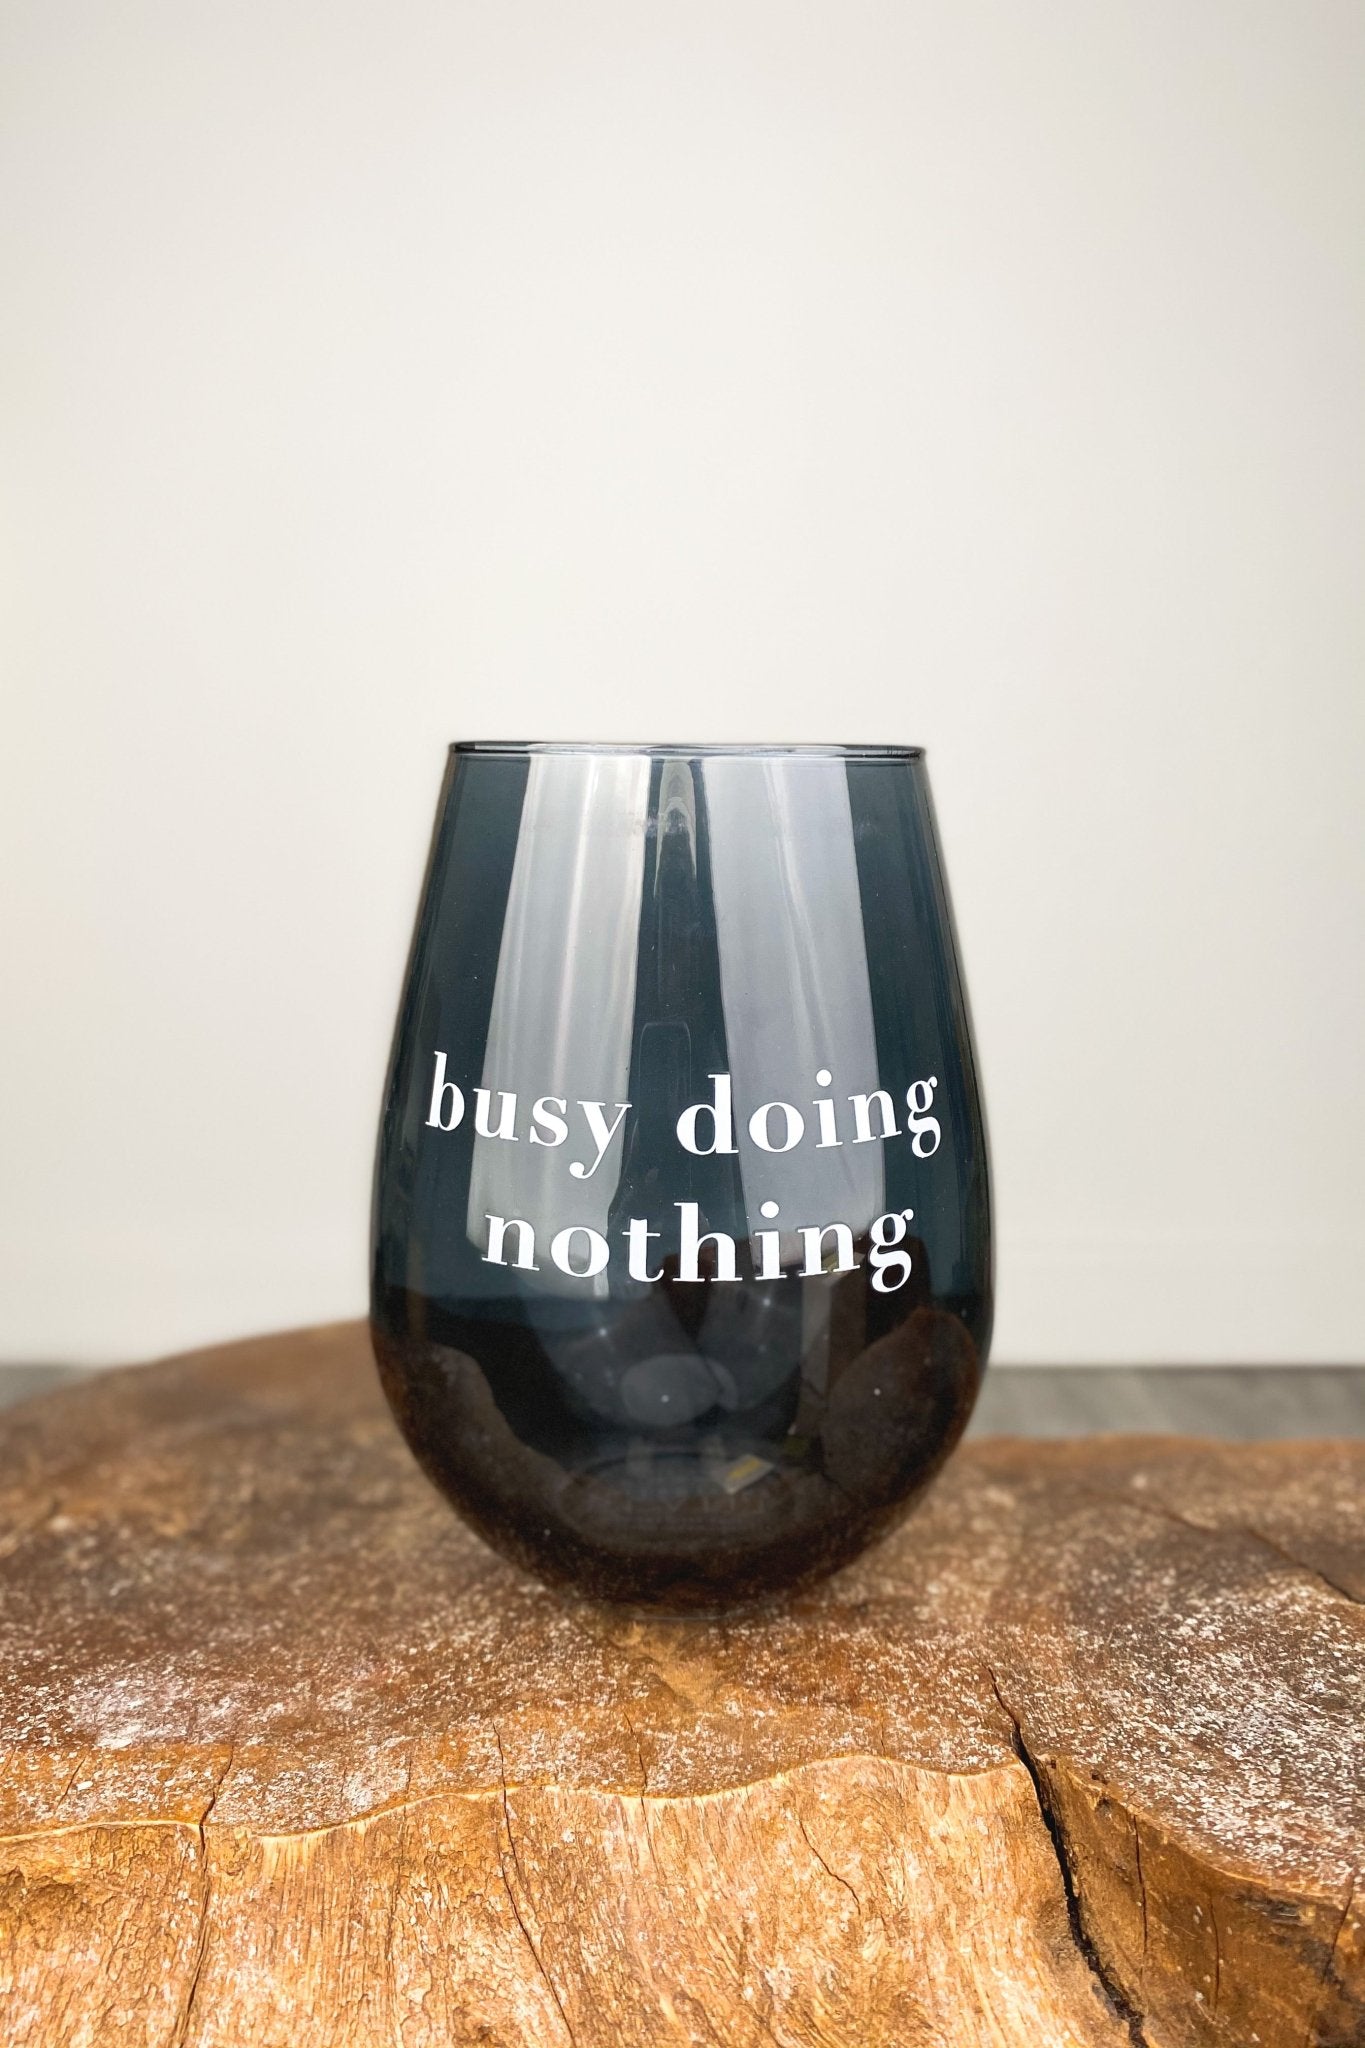 Busy doing nothing jumbo wine glass - Trendy Tumblers, Mugs and Cups at Lush Fashion Lounge Boutique in Oklahoma City